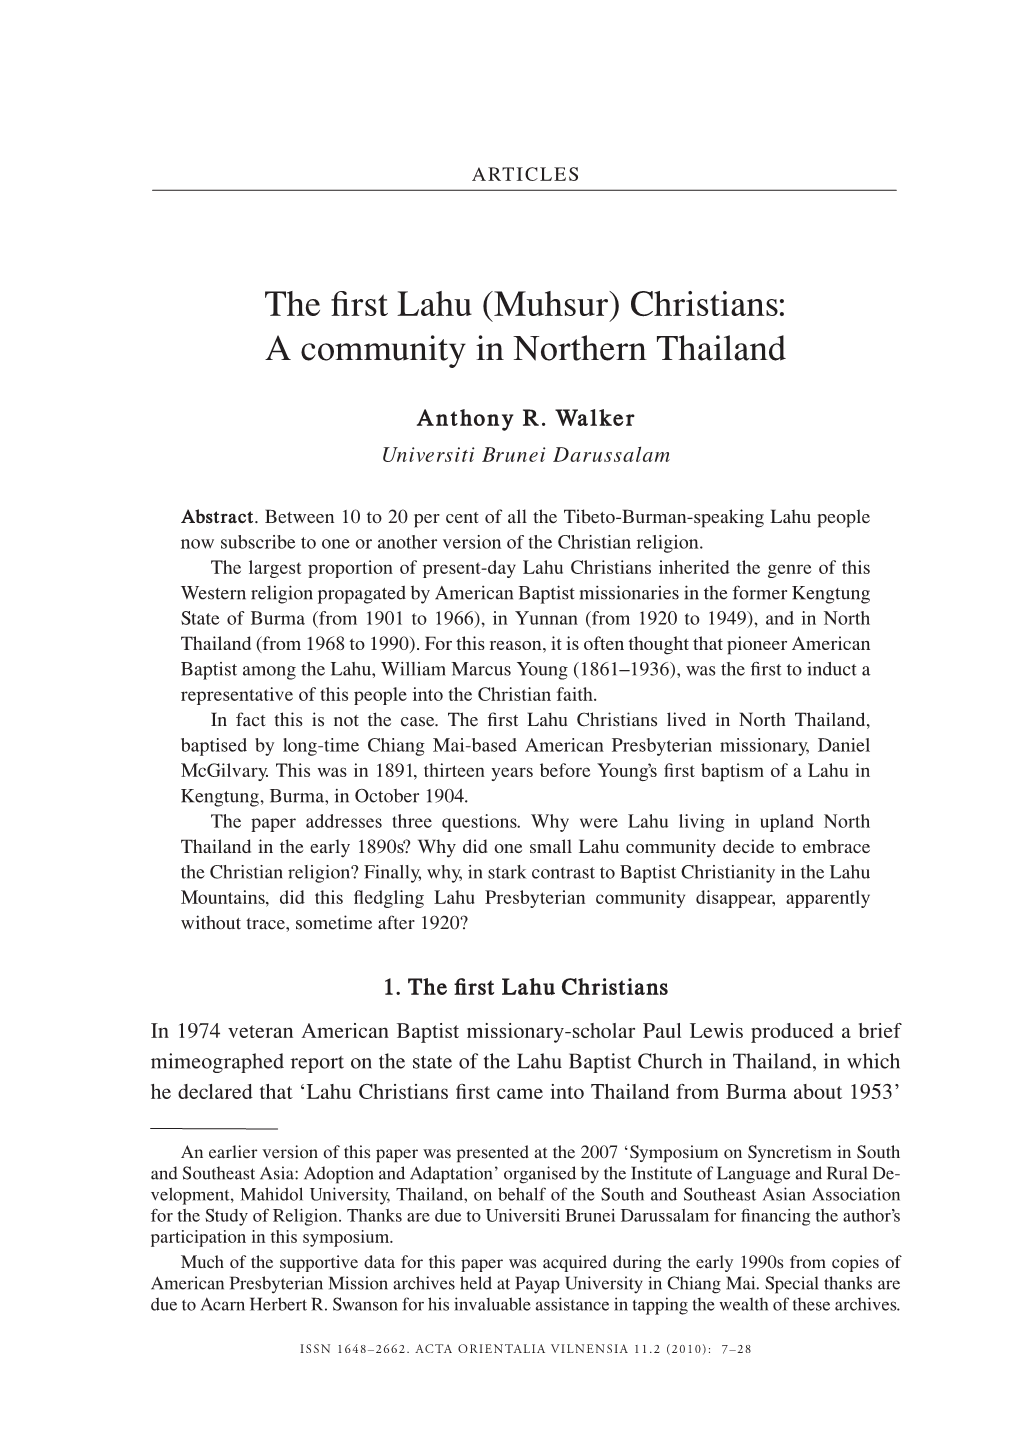 The First Lahu (Muhsur) Christians: a Community in Northern Thailand